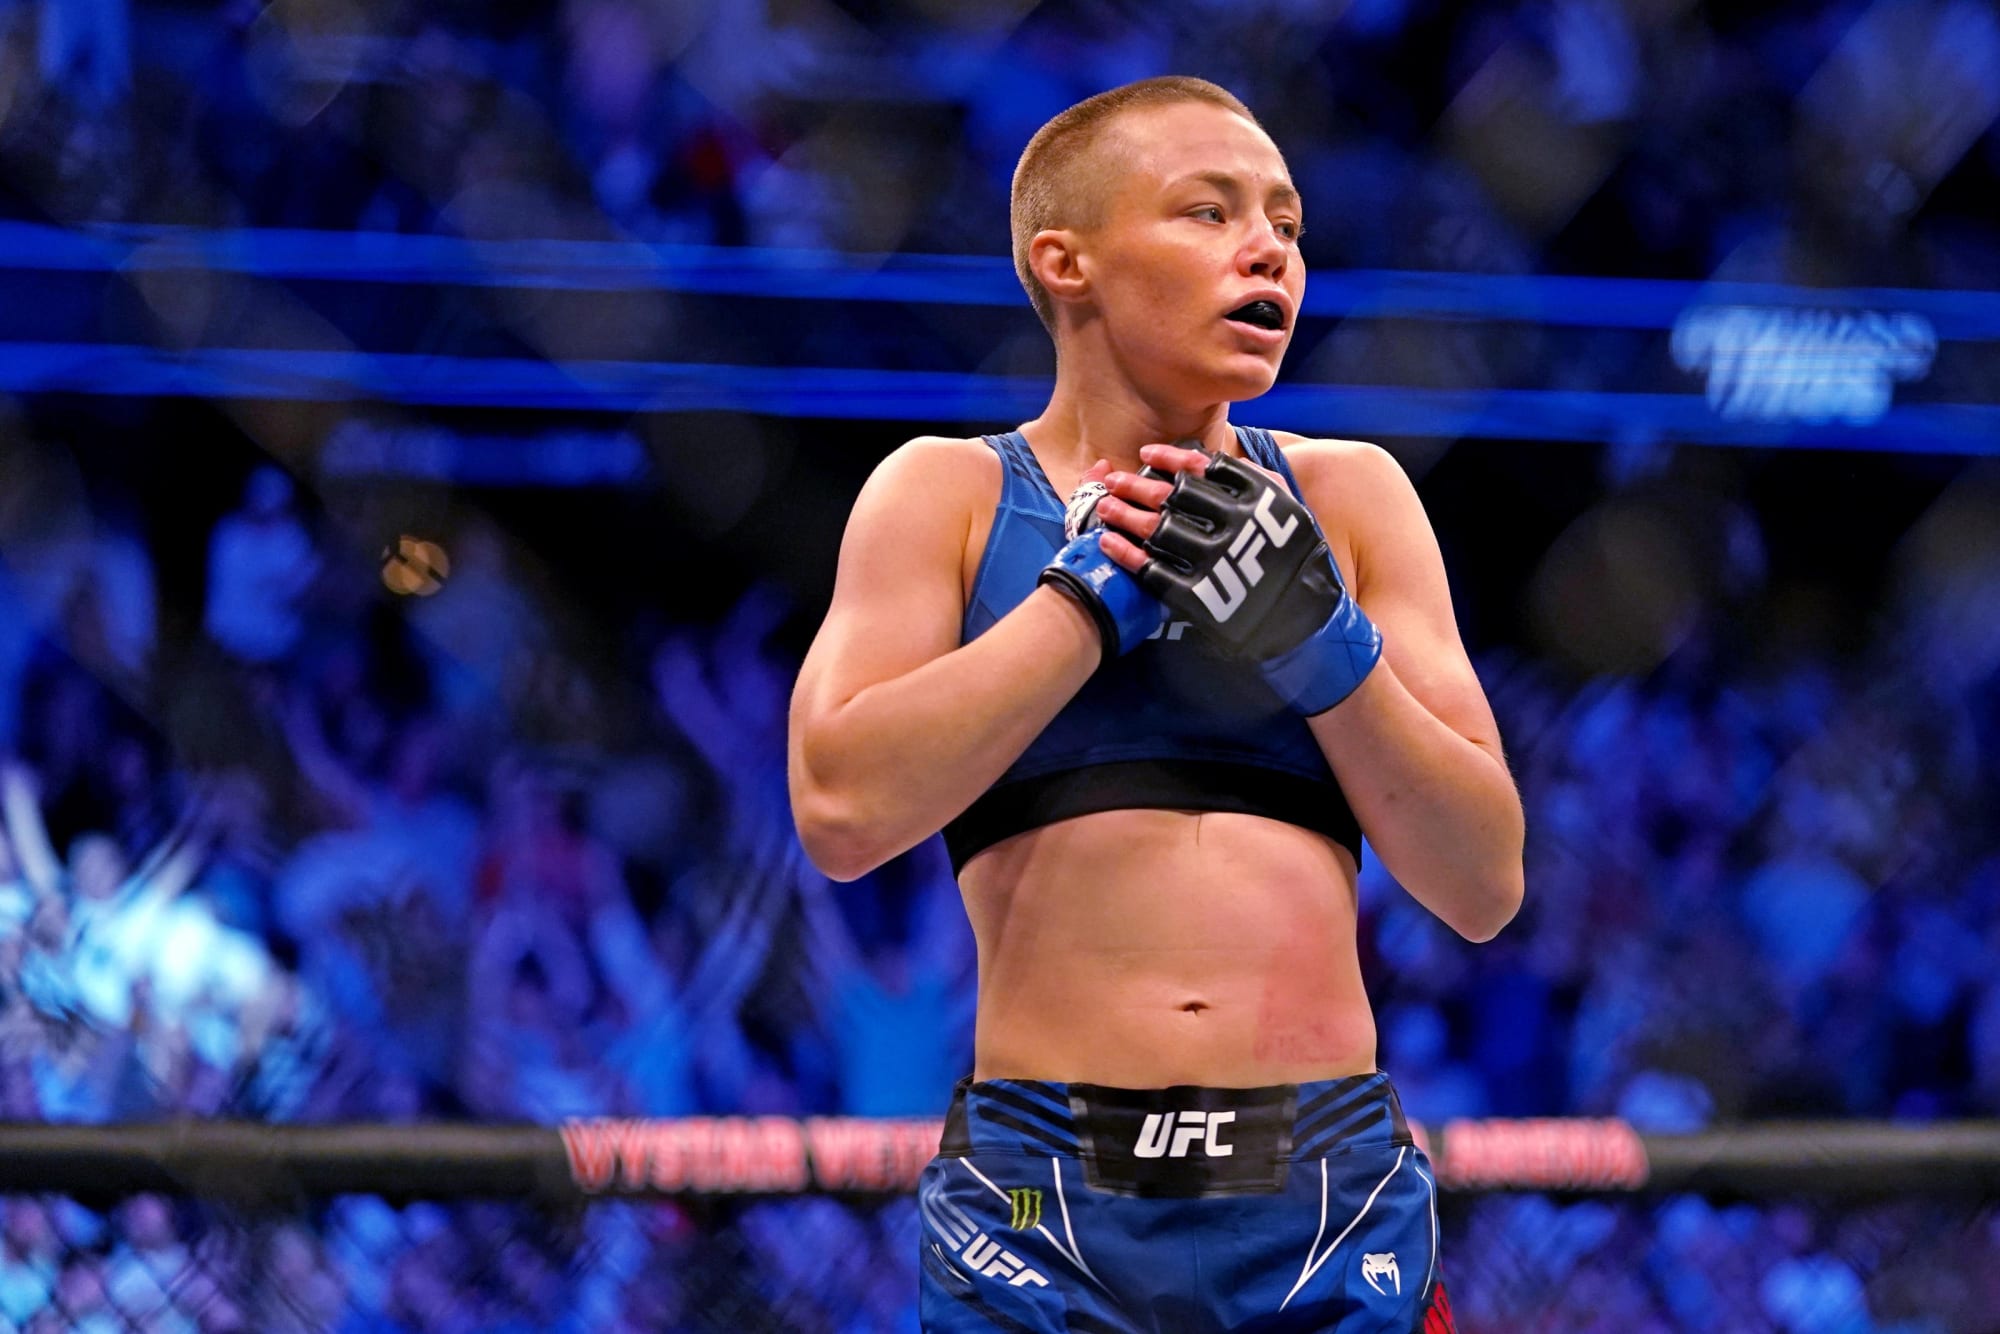 UFC 268 Rose Namajunas vs. Weili Zhang 2 preview and prediction